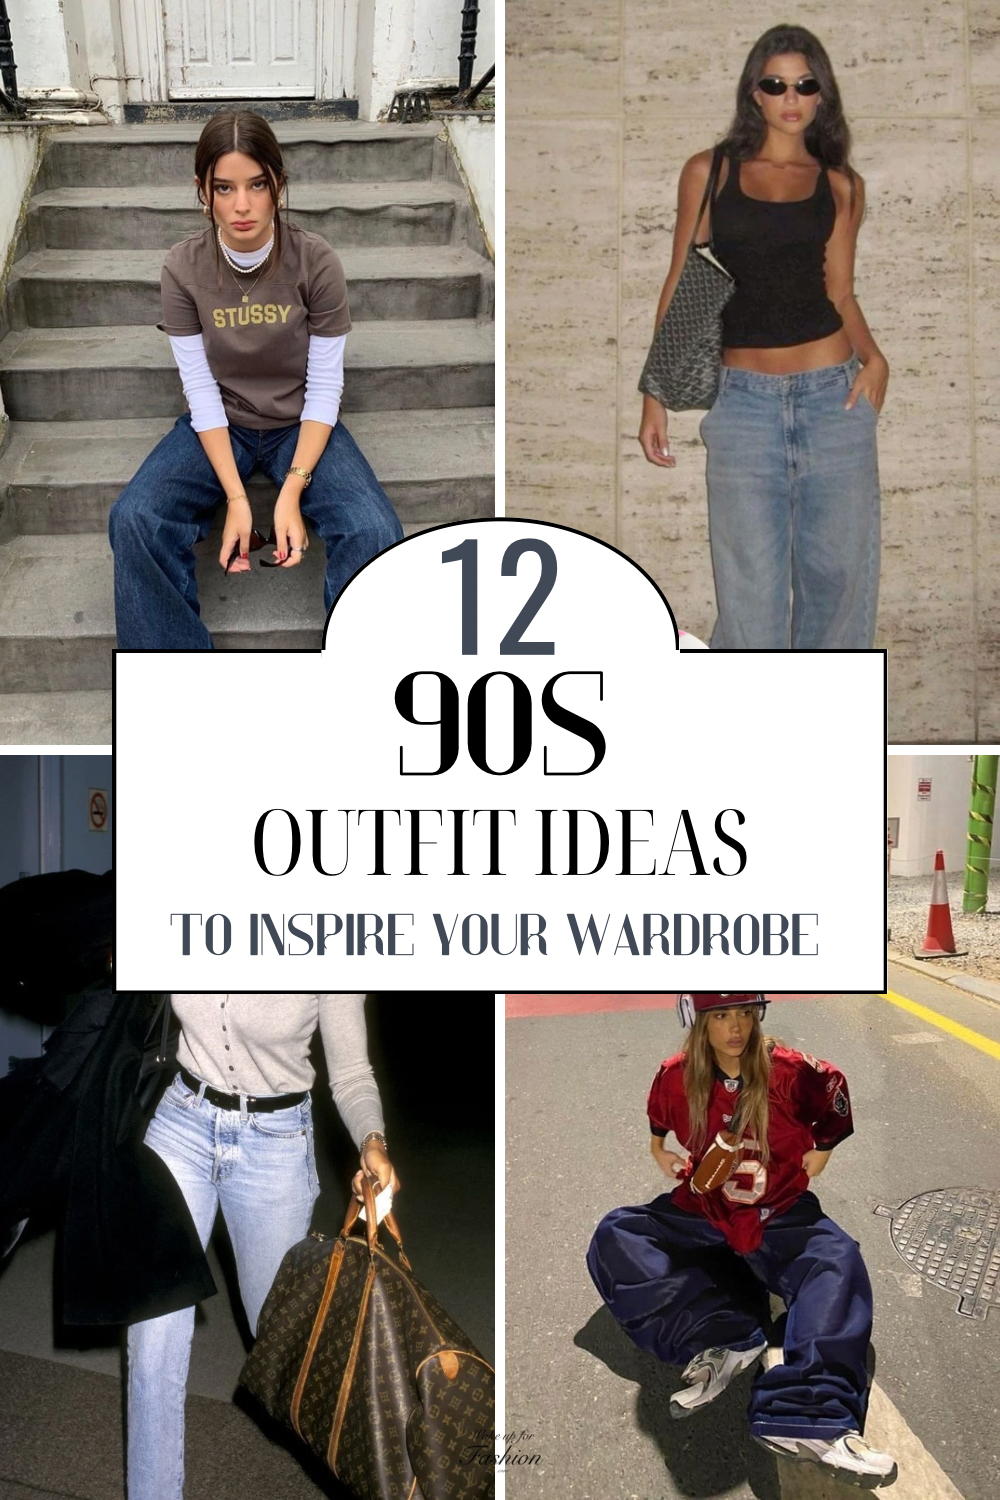 90s outfit ideas for women